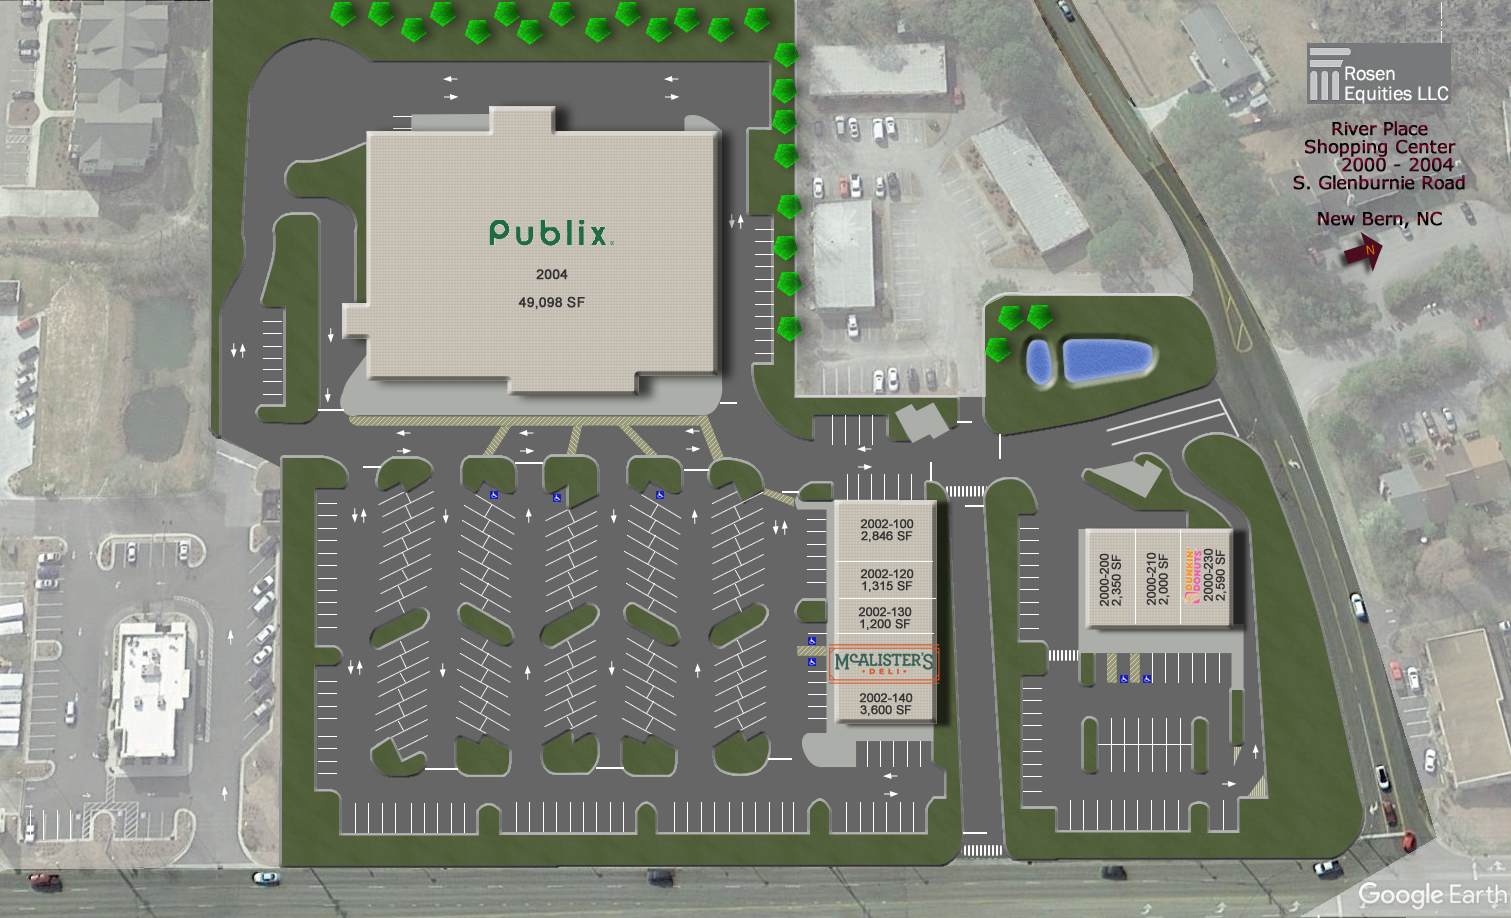 River Place Shopping Center site plan